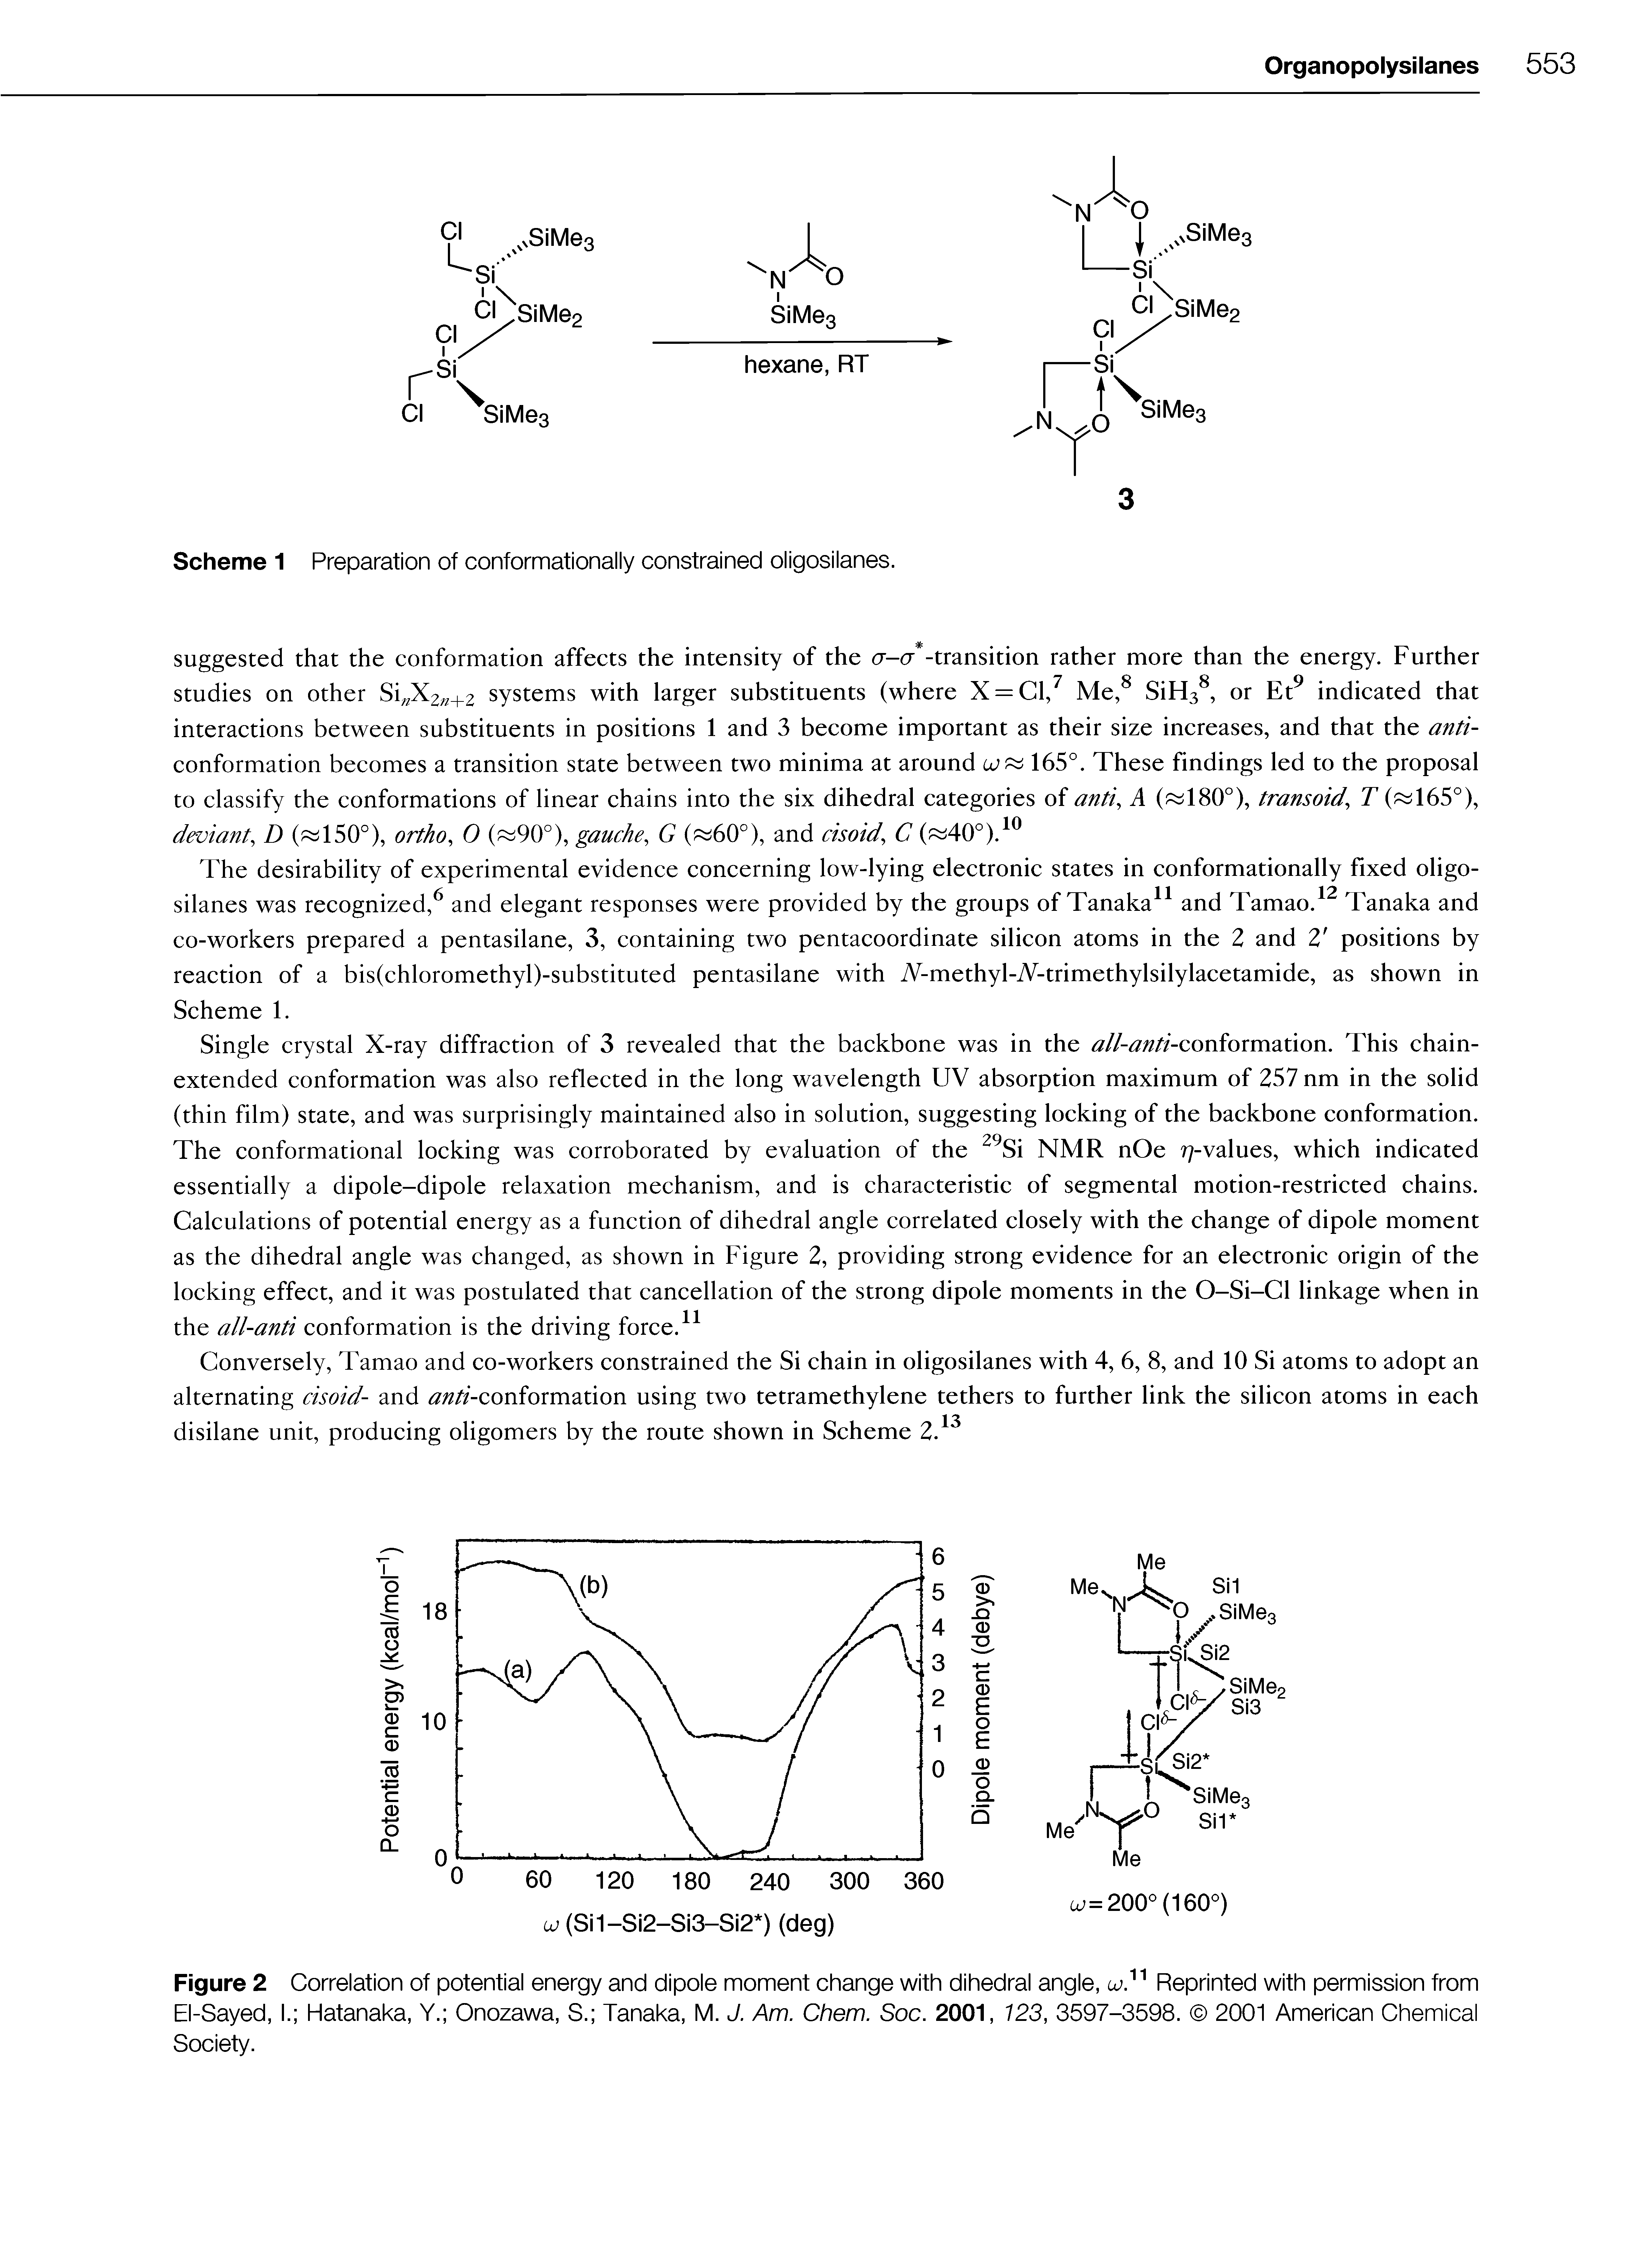 Figure 2 Correlation of potential energy and dipole moment change with dihedral angle, ic.11 Reprinted with permission from El-Sayed, I. Hatanaka, Y. Onozawa, S. Tanaka, M. J. Am. Chem. Soc. 2001, 123, 3597-3598. 2001 American Chemical Society.